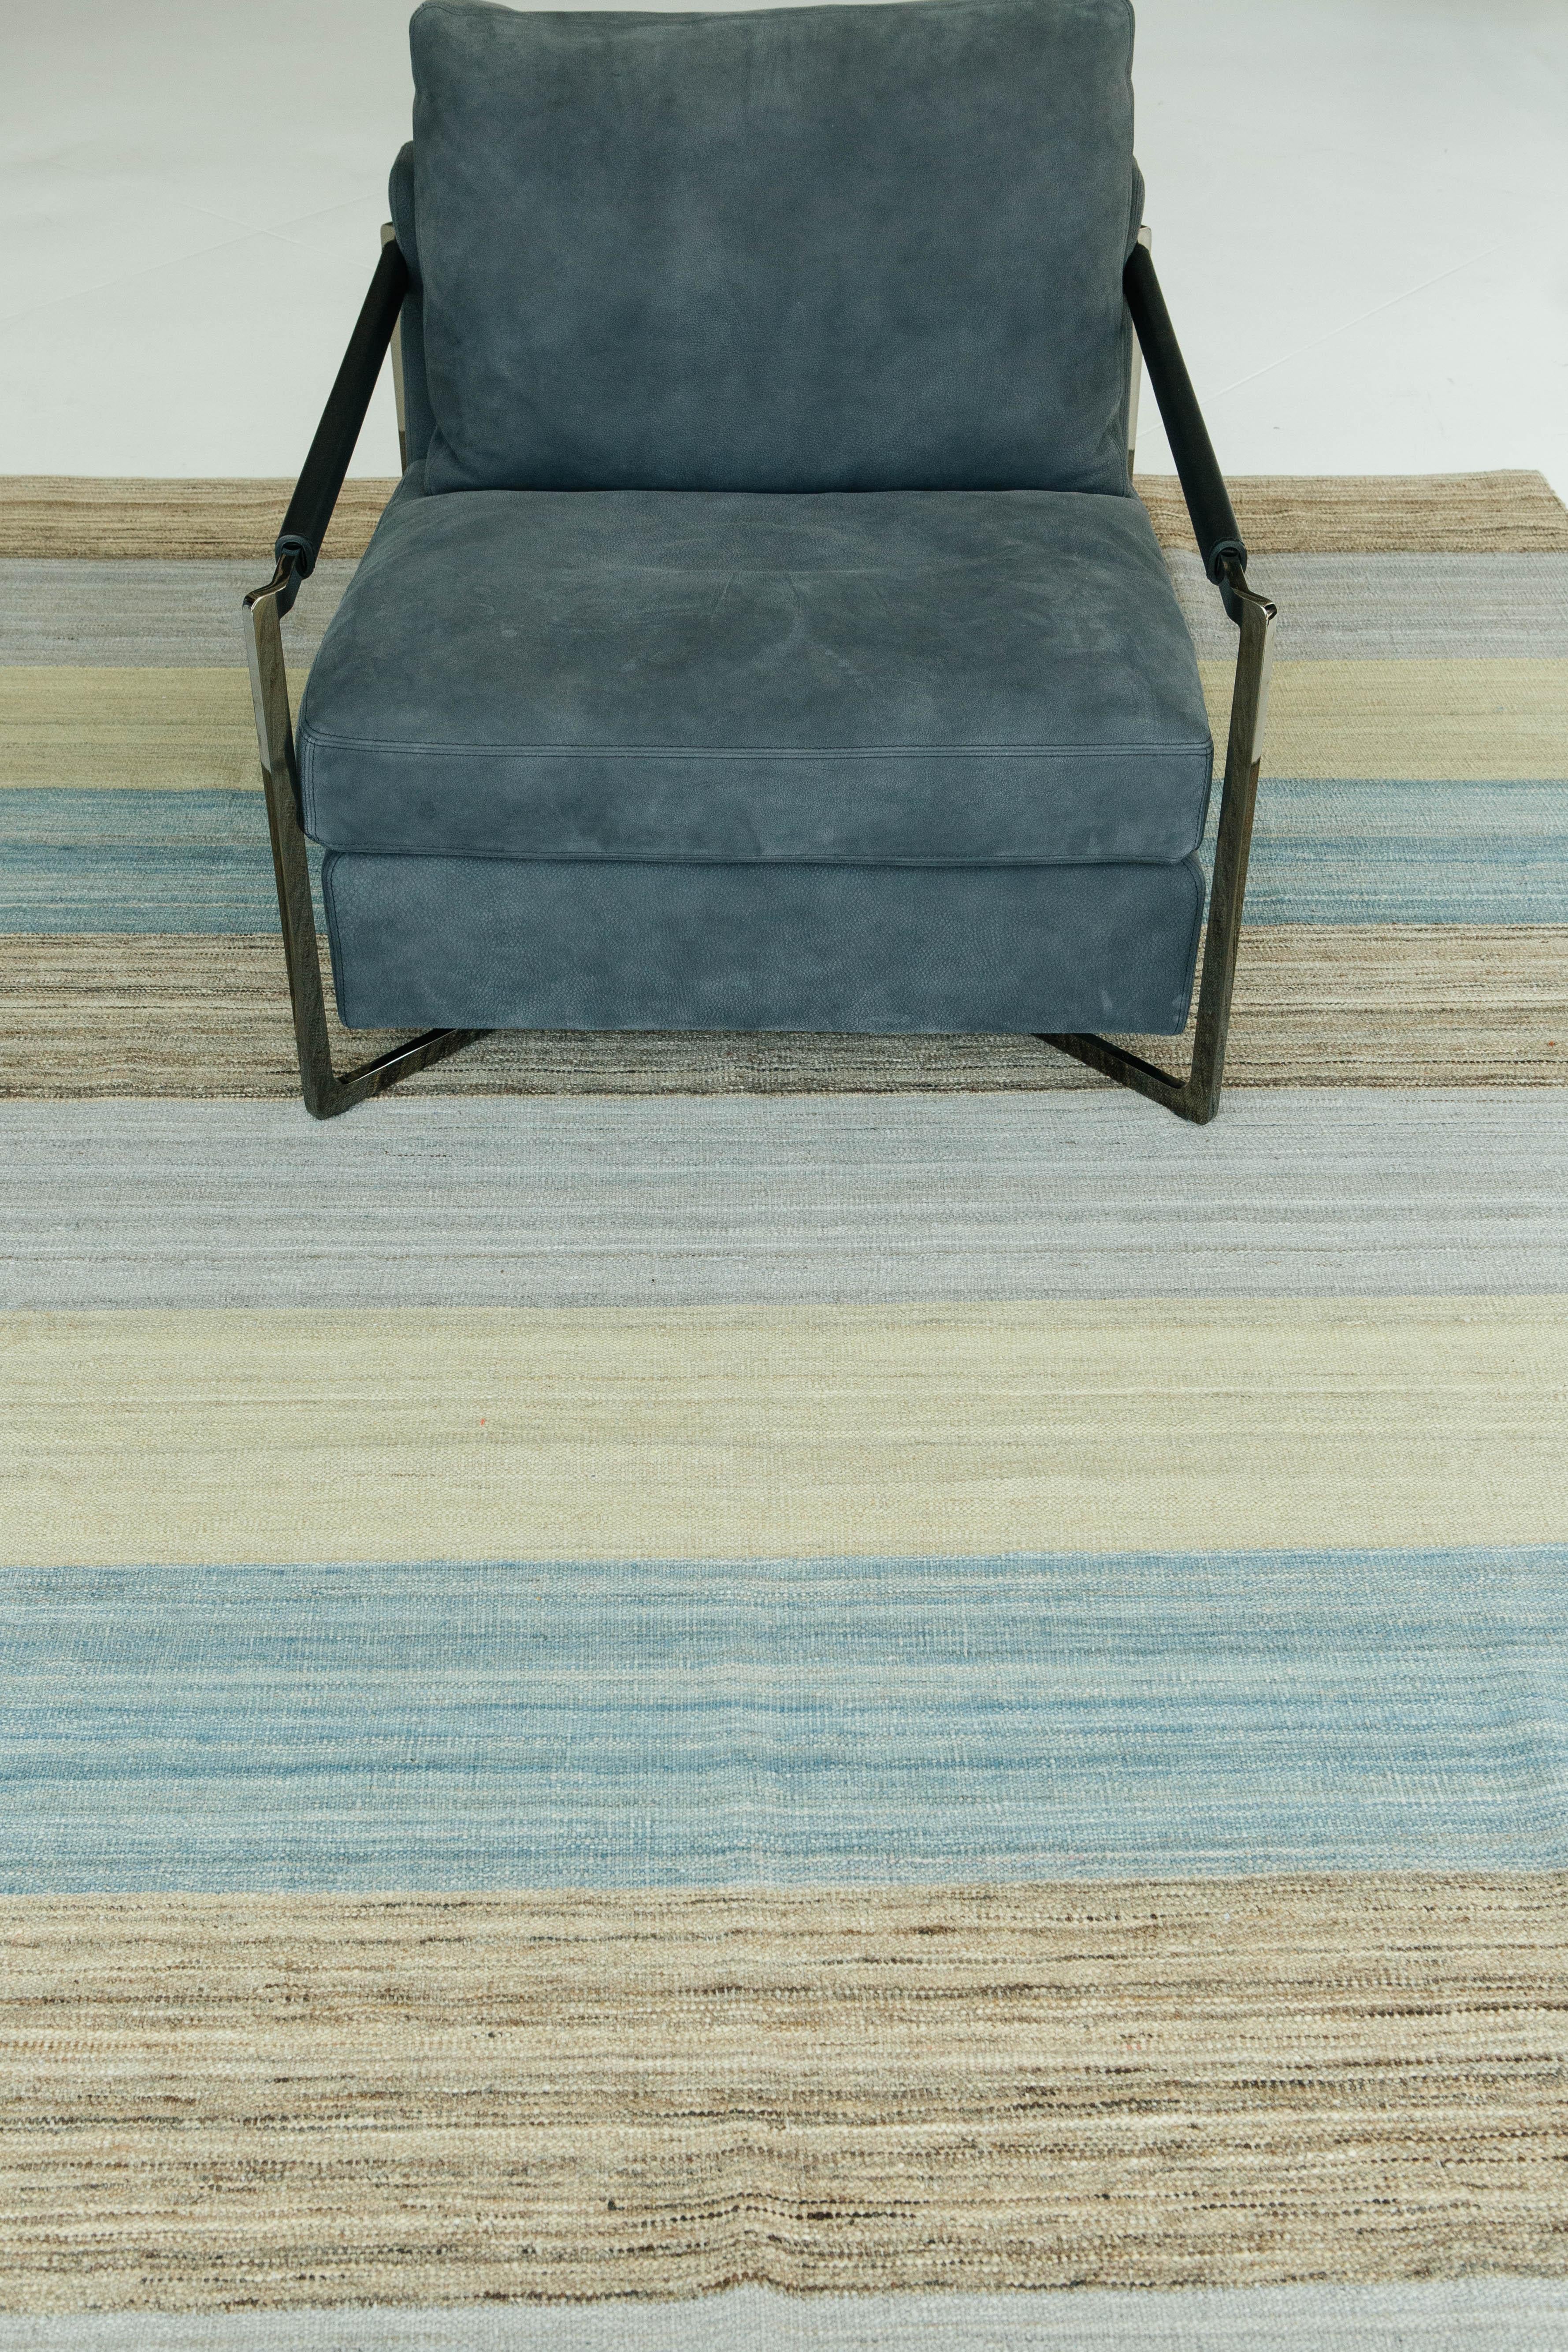 A natural dye flat-weave Kilim in crisp sage, soft blue, brown, and gray. These colors are spun into an alternating stripe pattern that work together to create a soft and soothing vibe. The Puro Collection features contemporary designs handmade by